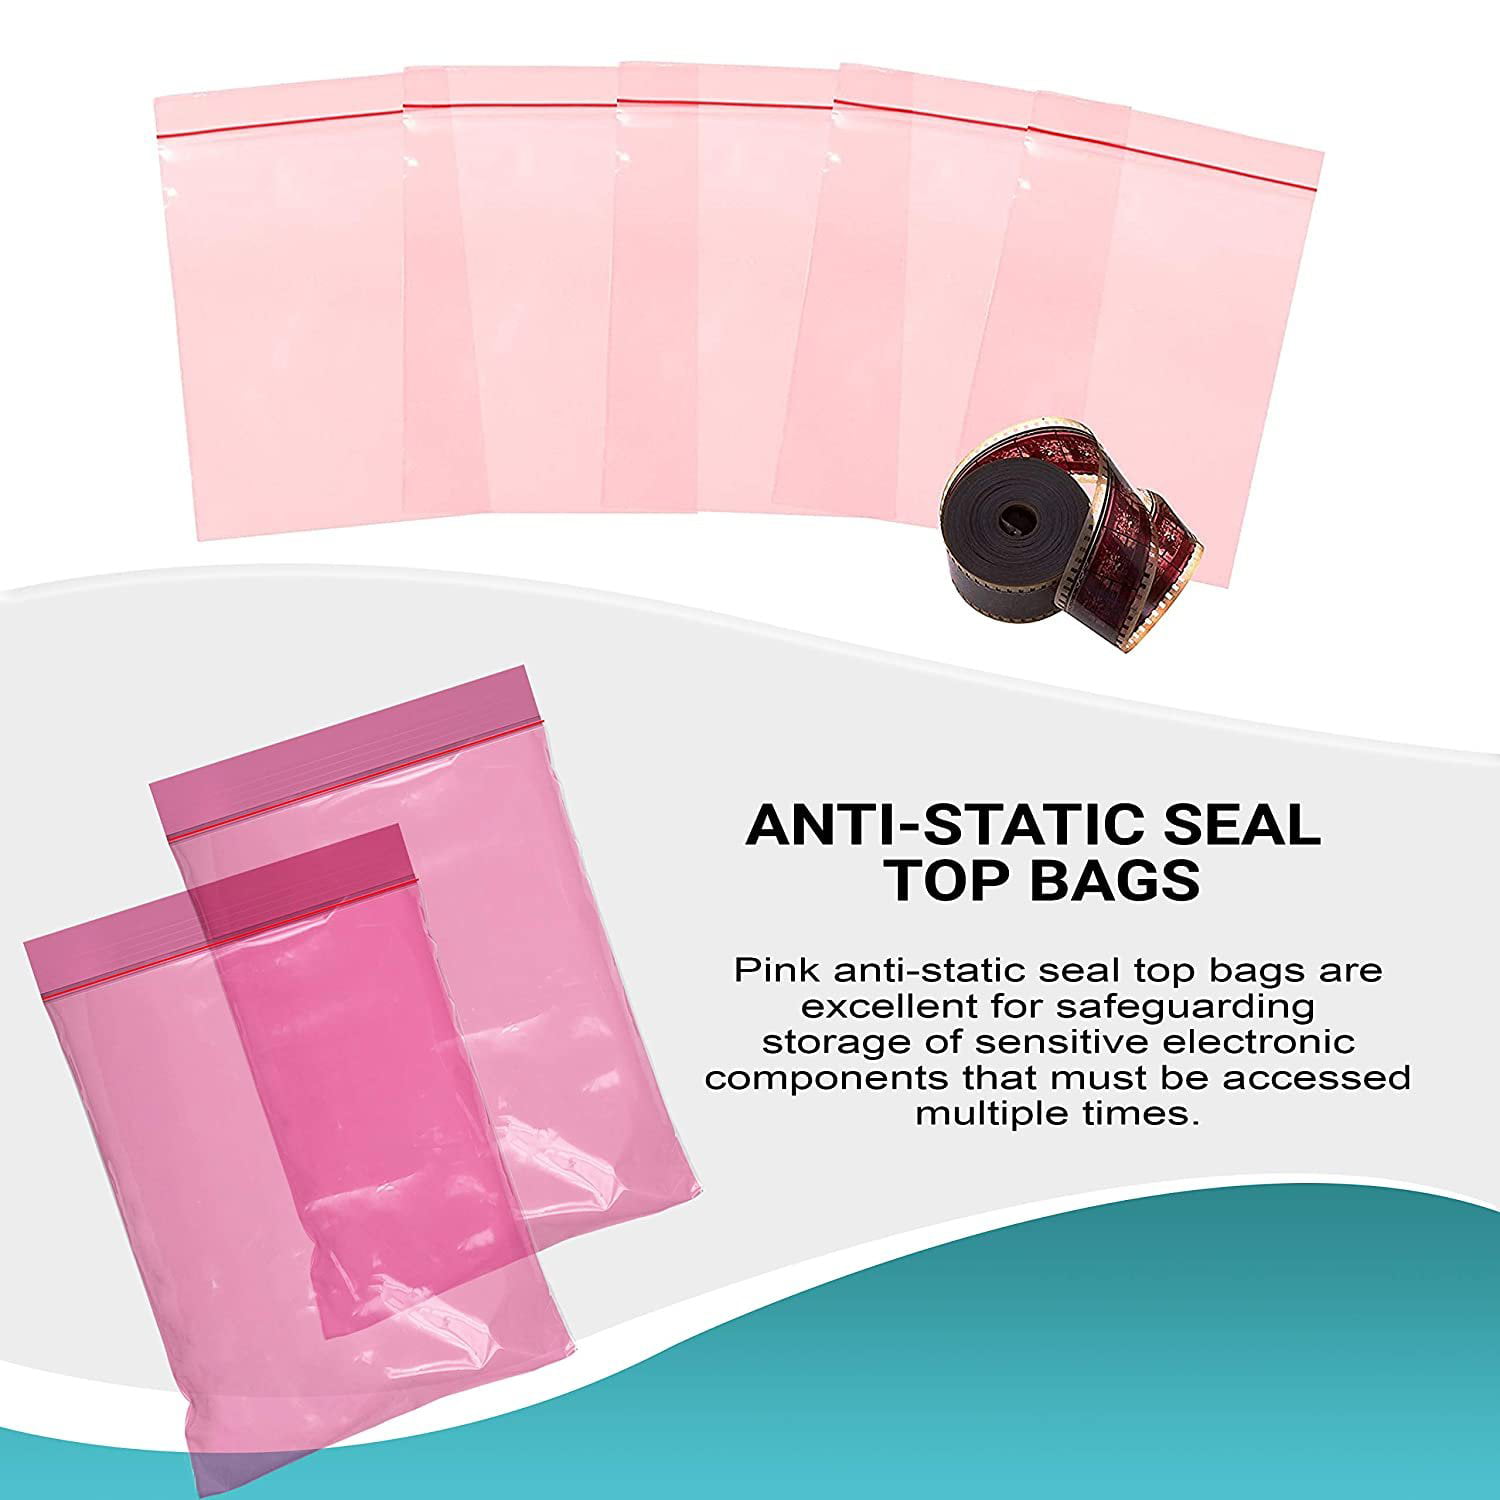 Ideal for Industrial Applications storing Amine free. Pink 6 x 8 APQ Pack of 100 Anti-Static Seal Top Bags Zip Locking bags 6x8 Ultra Thick Polyethylene packs 4 mil thickness Great for packaging 